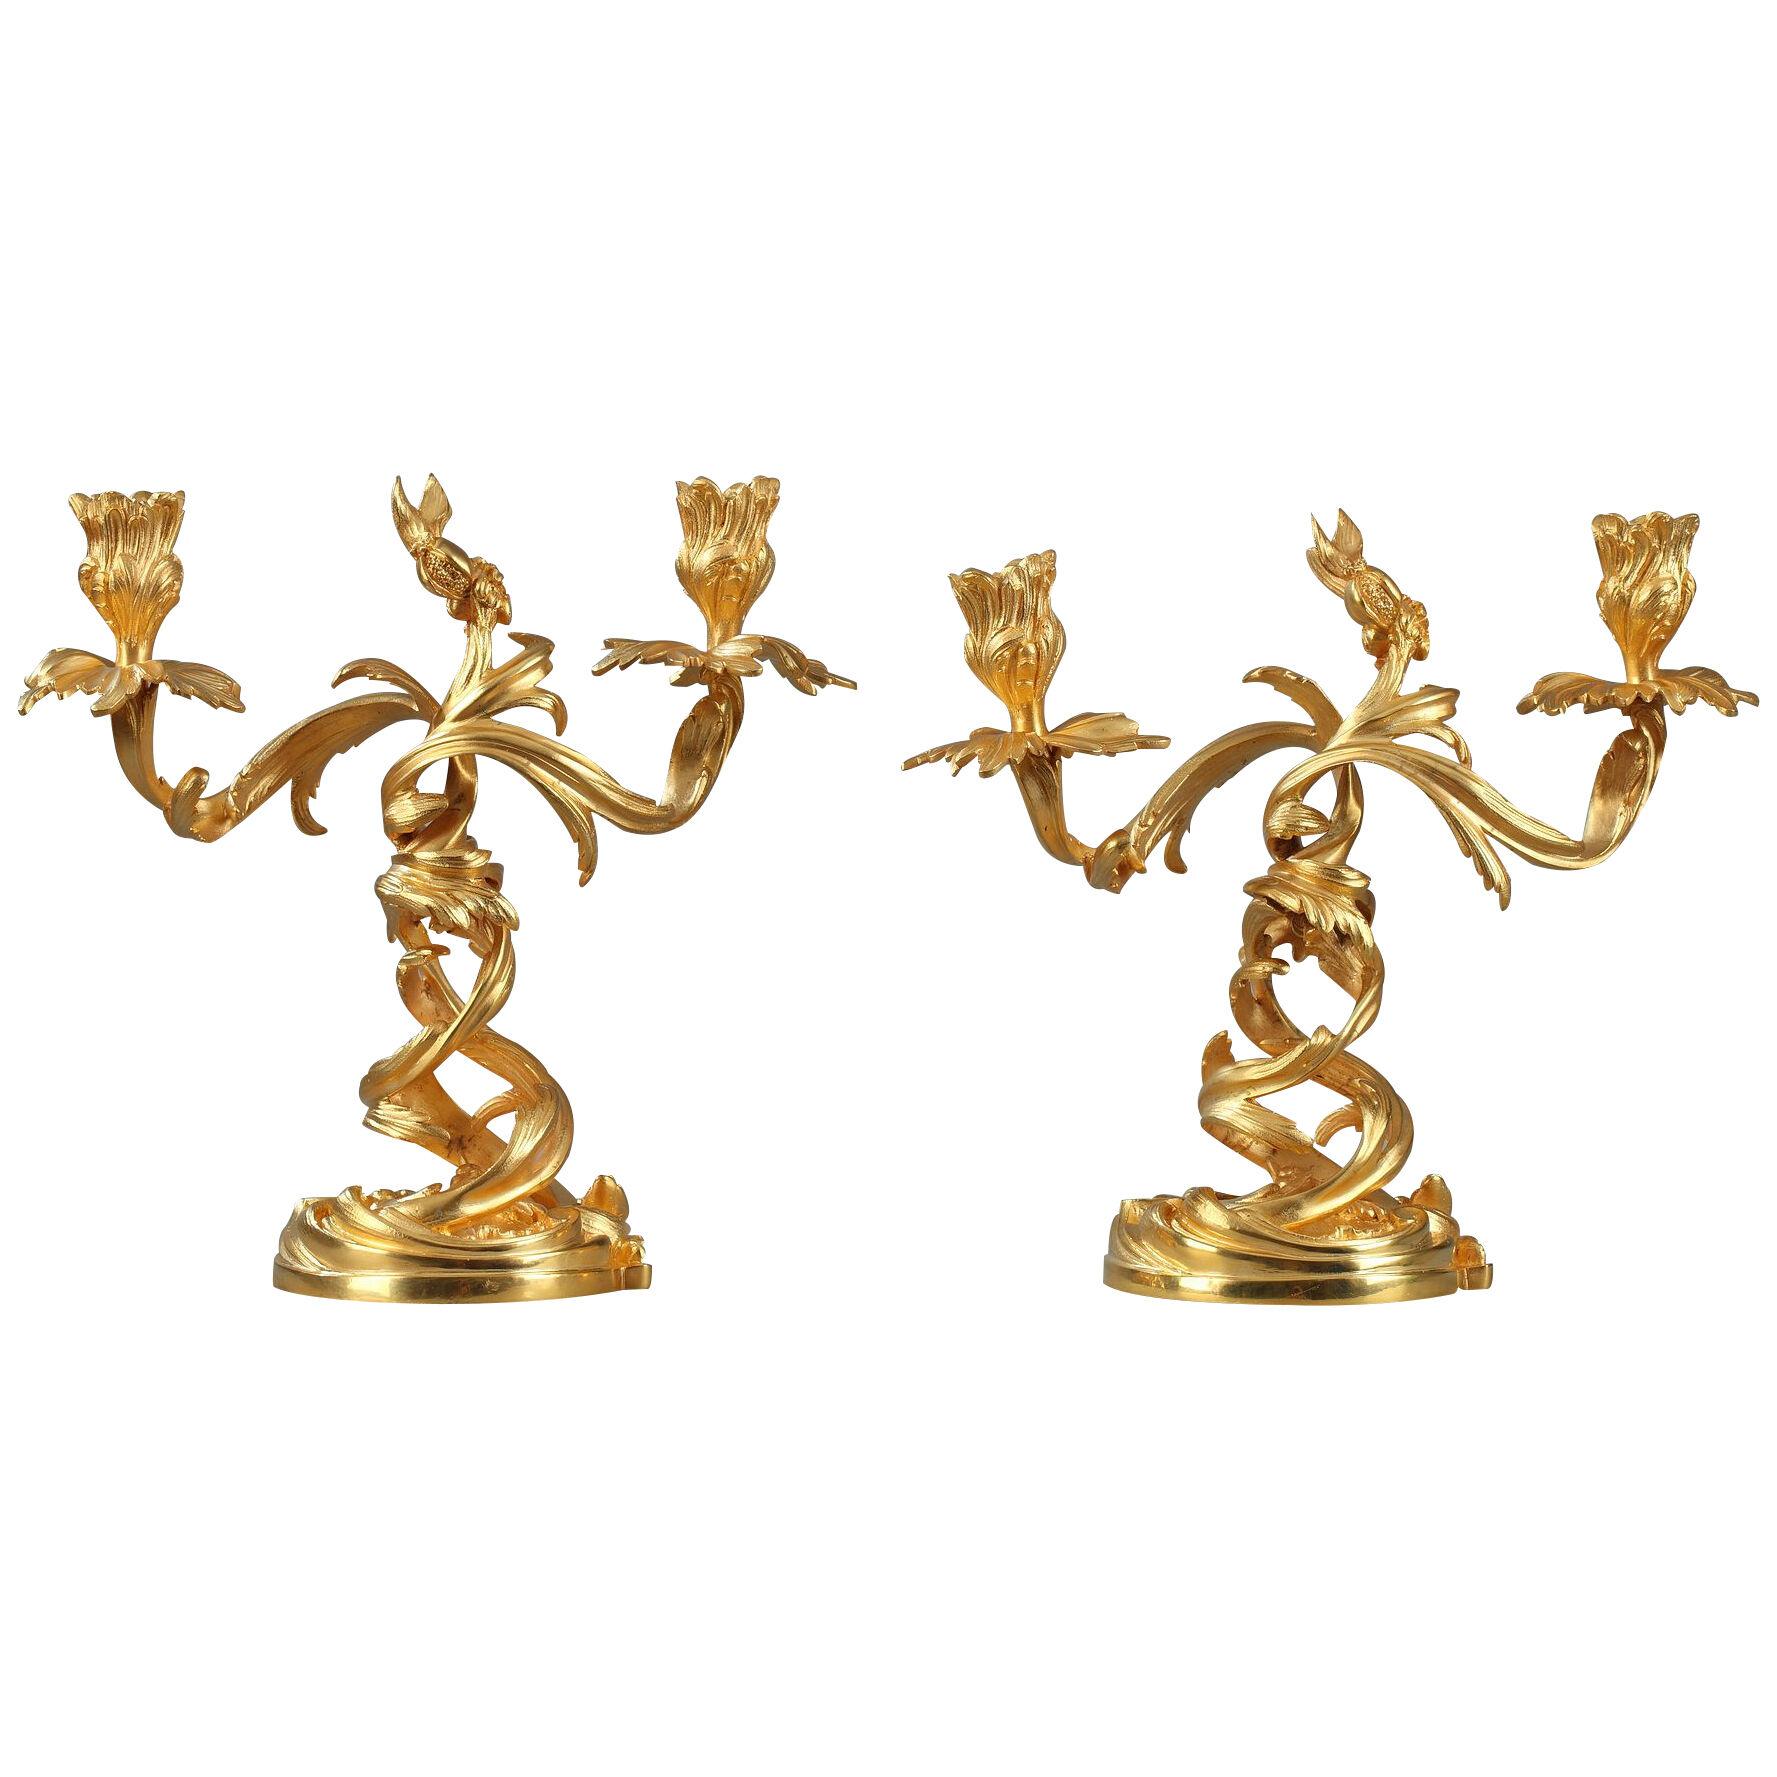 Pair of candlesticks in Louis XV style